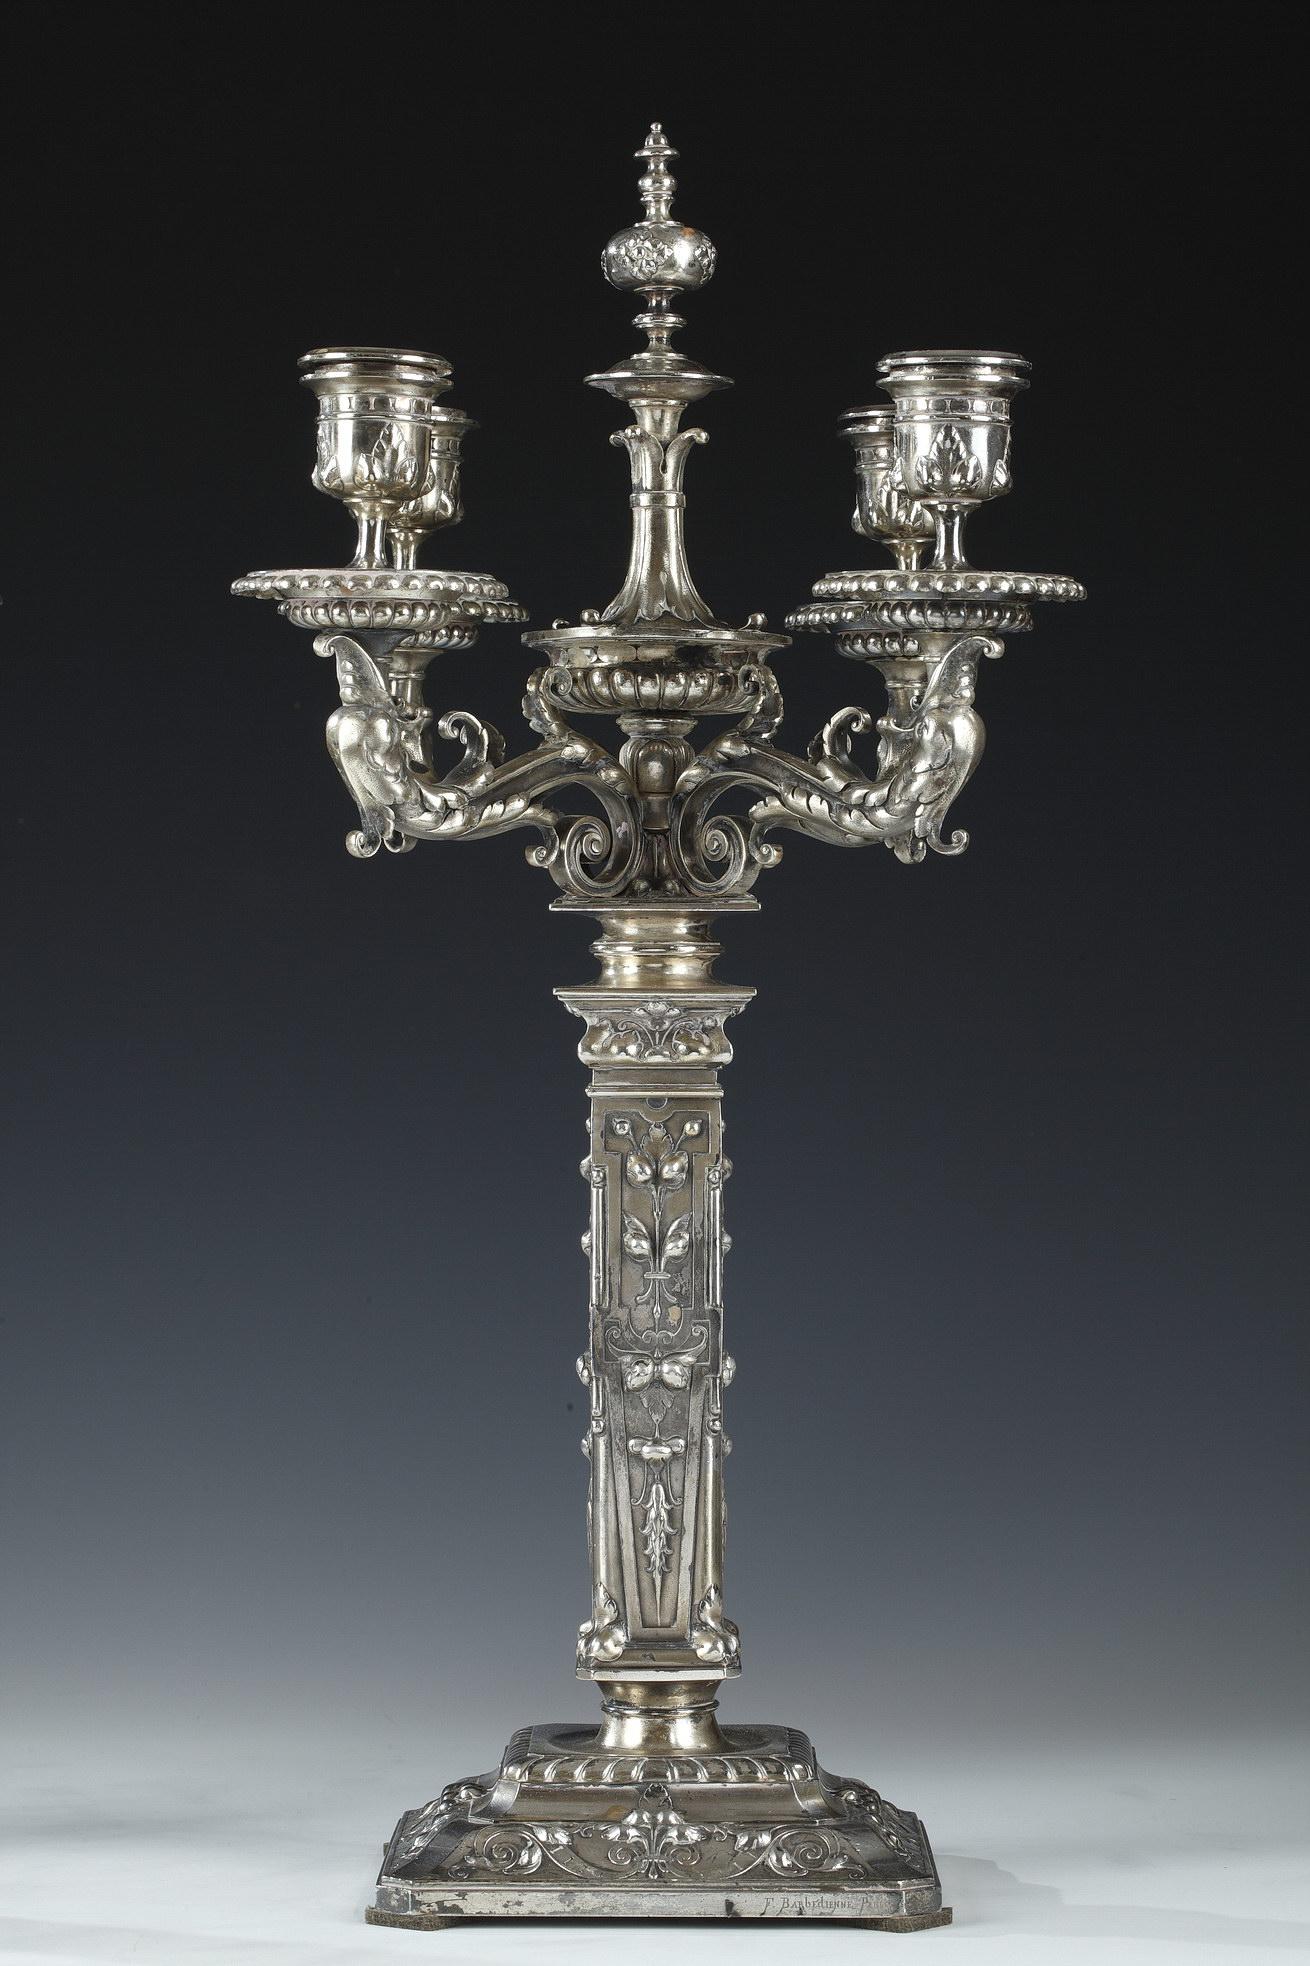 Renaissance Pair of Candelabras by F. Barbedienne, L-C. Sevin and D. Attarge, France, 1869